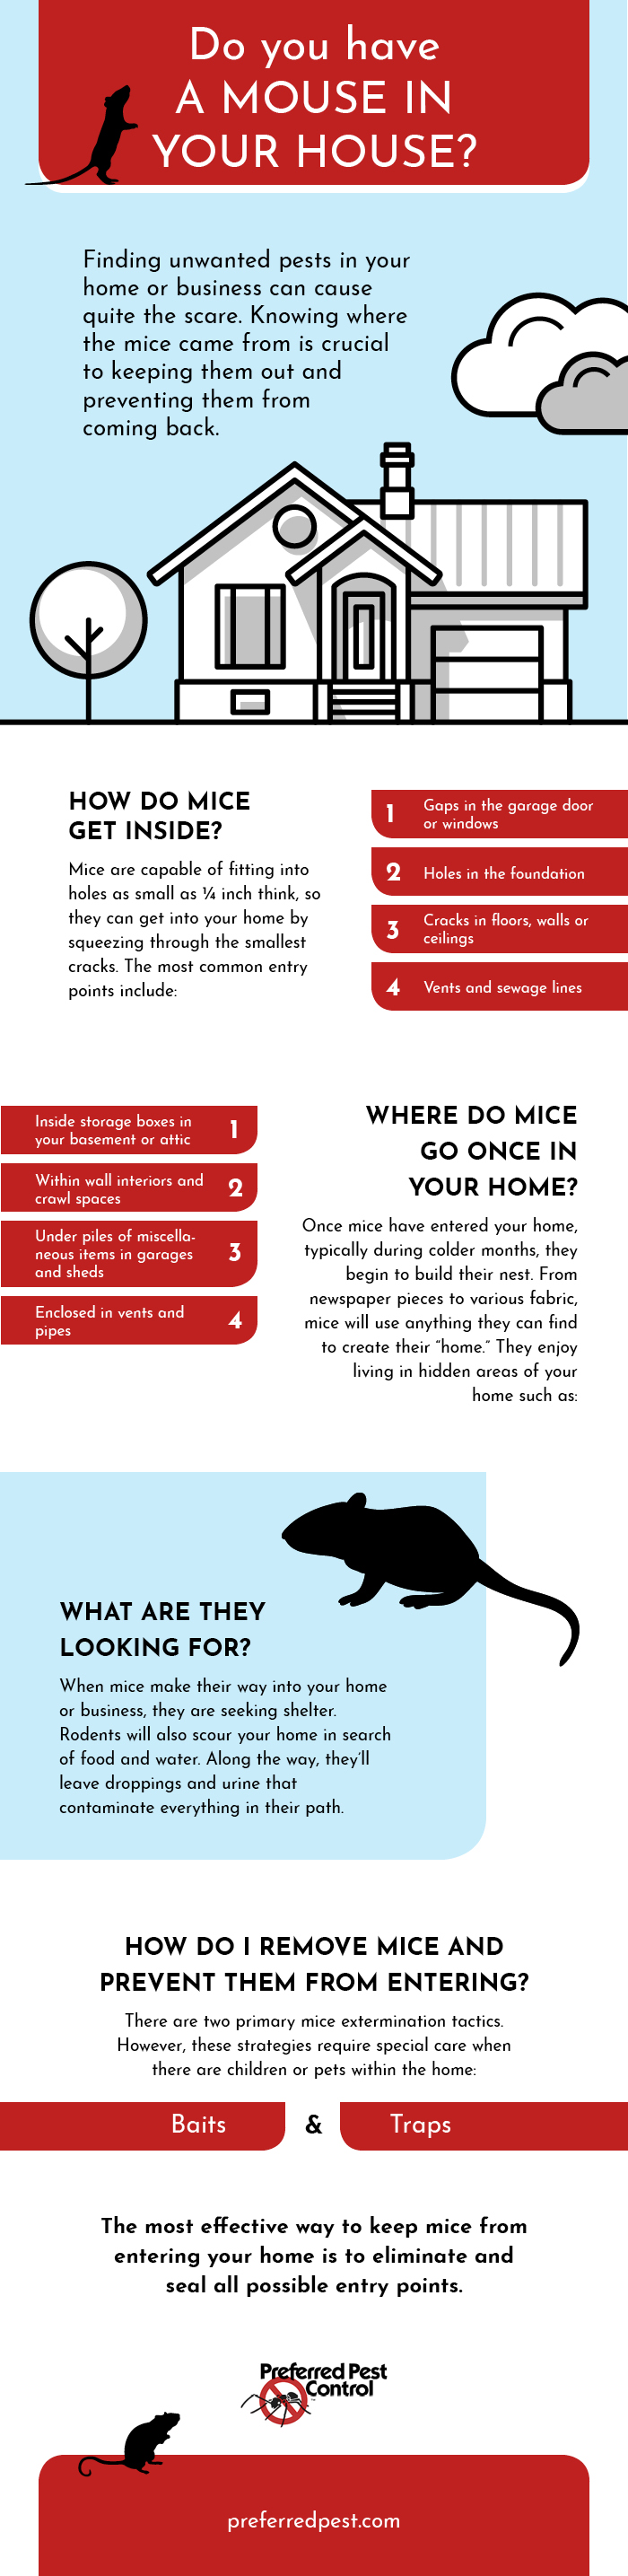 How to Remove Mice From Your Garage